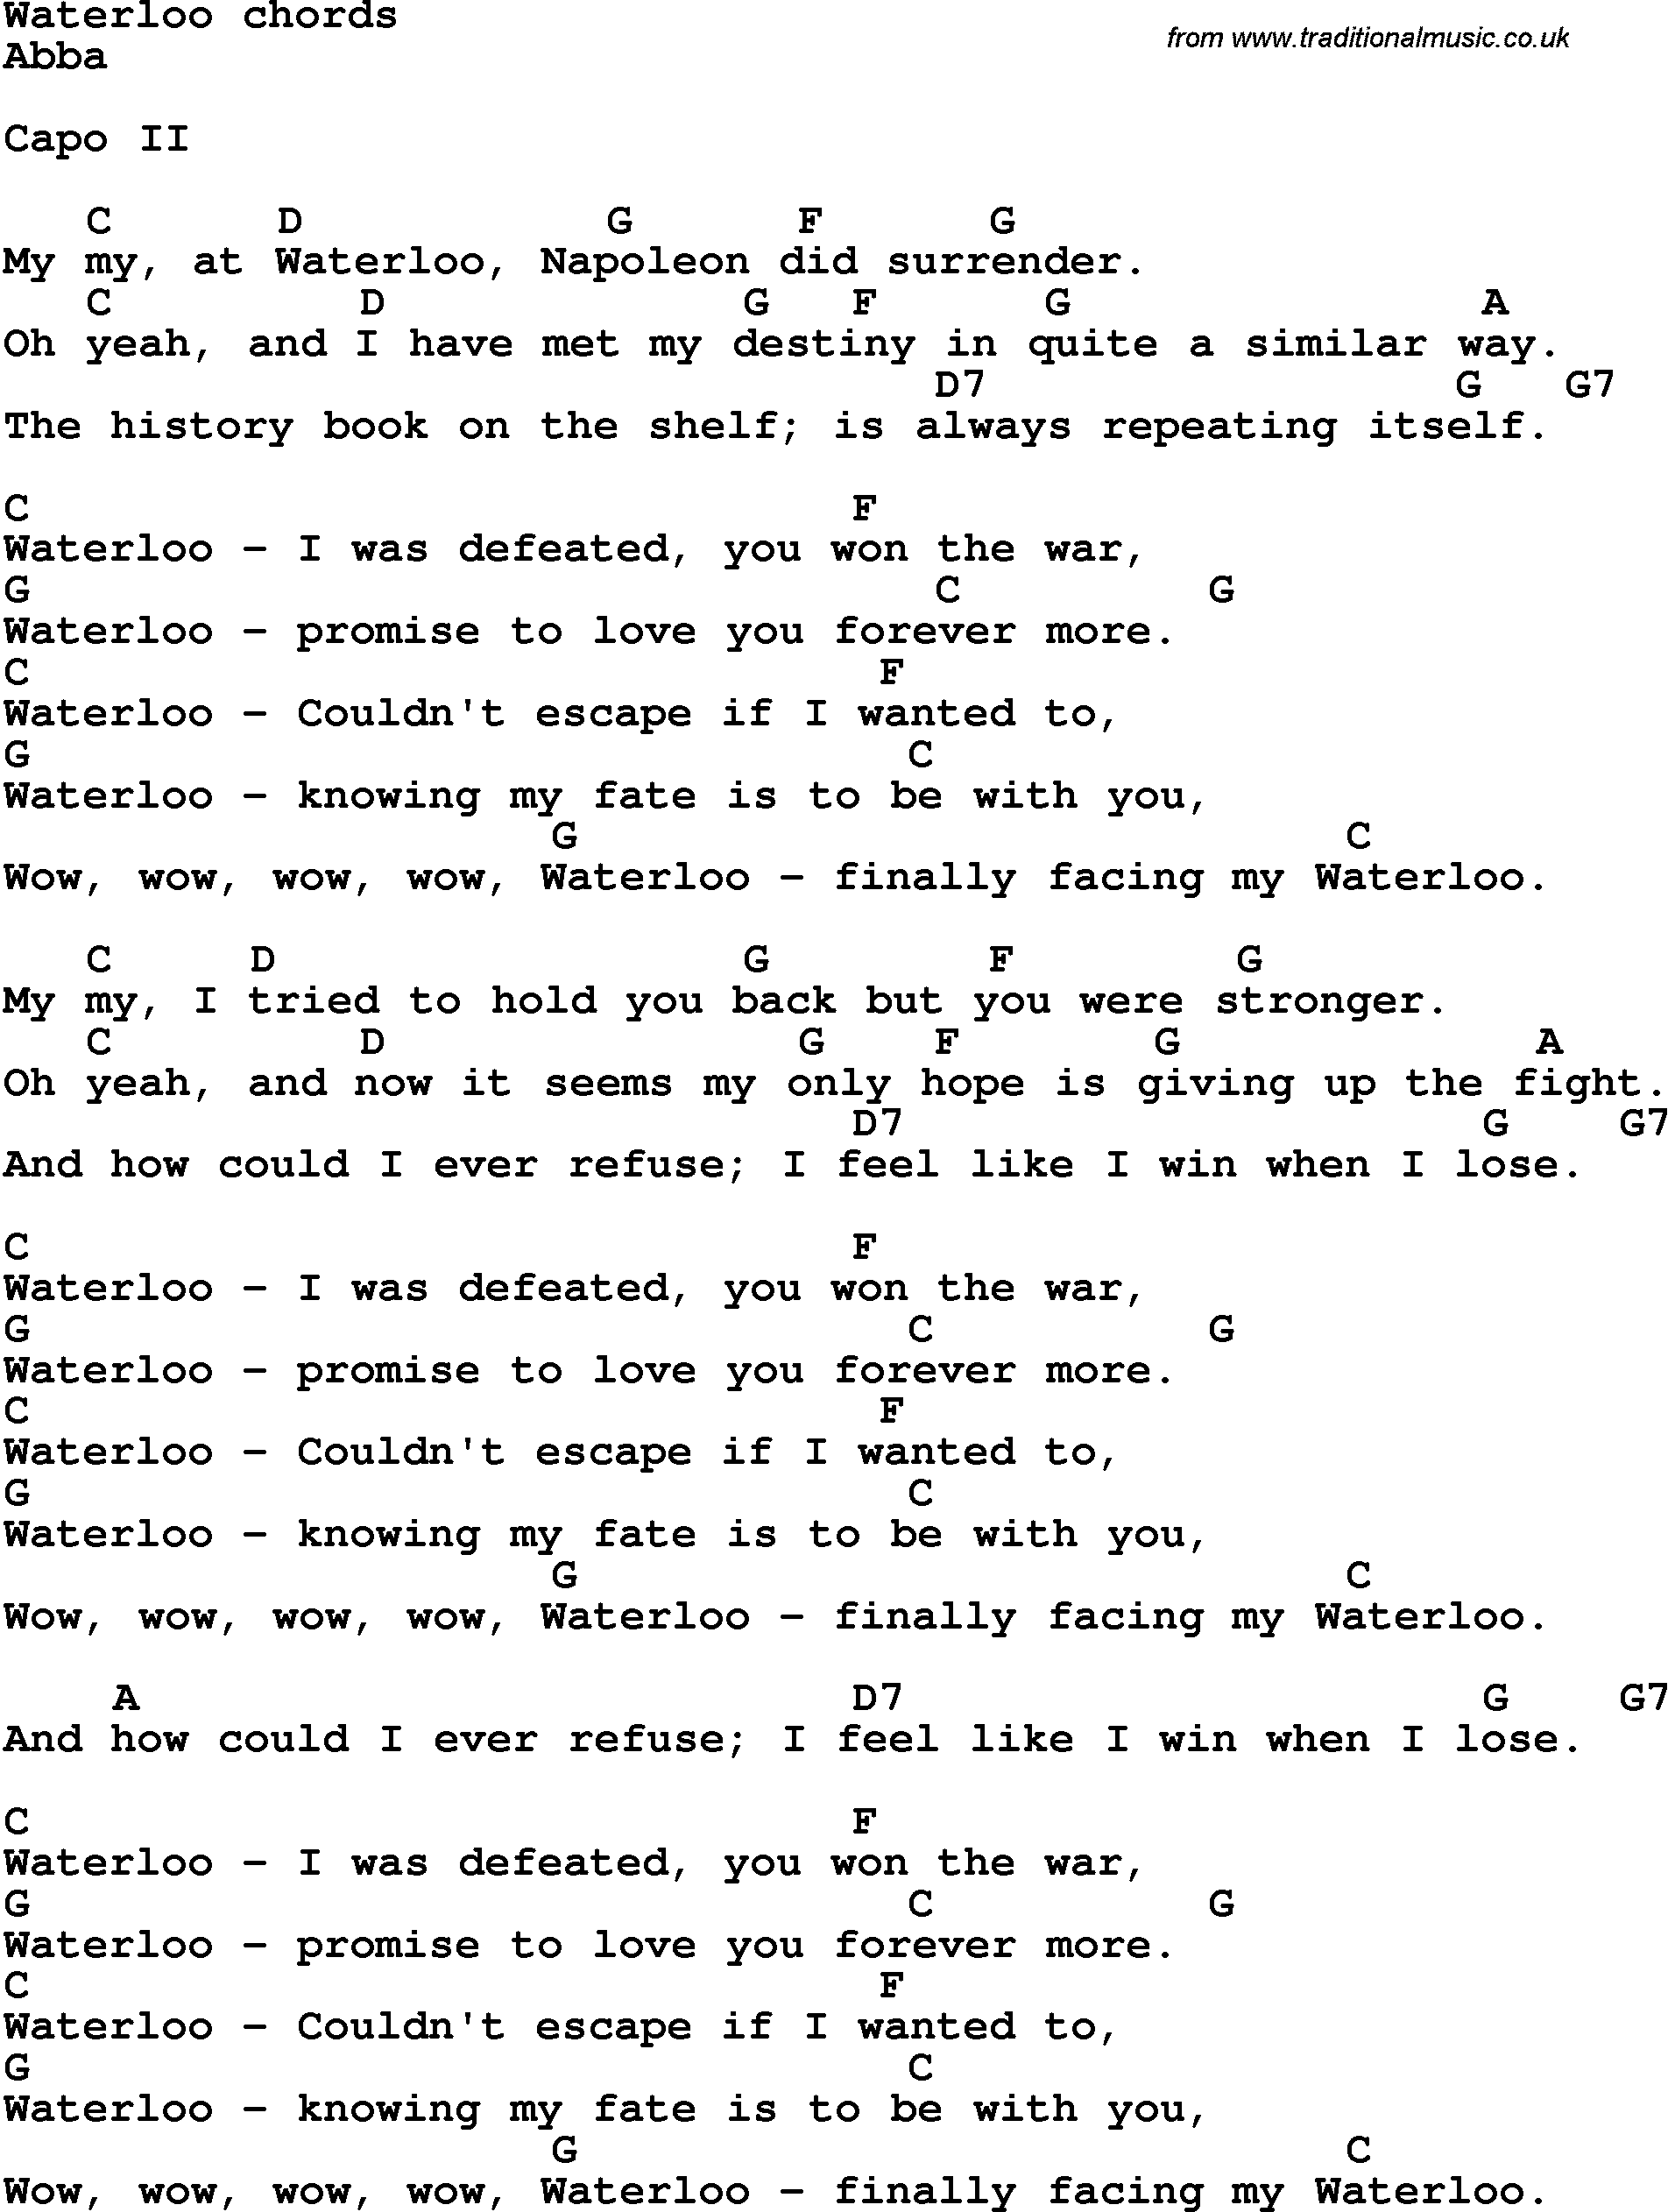 Song Lyrics with guitar chords for Waterloo